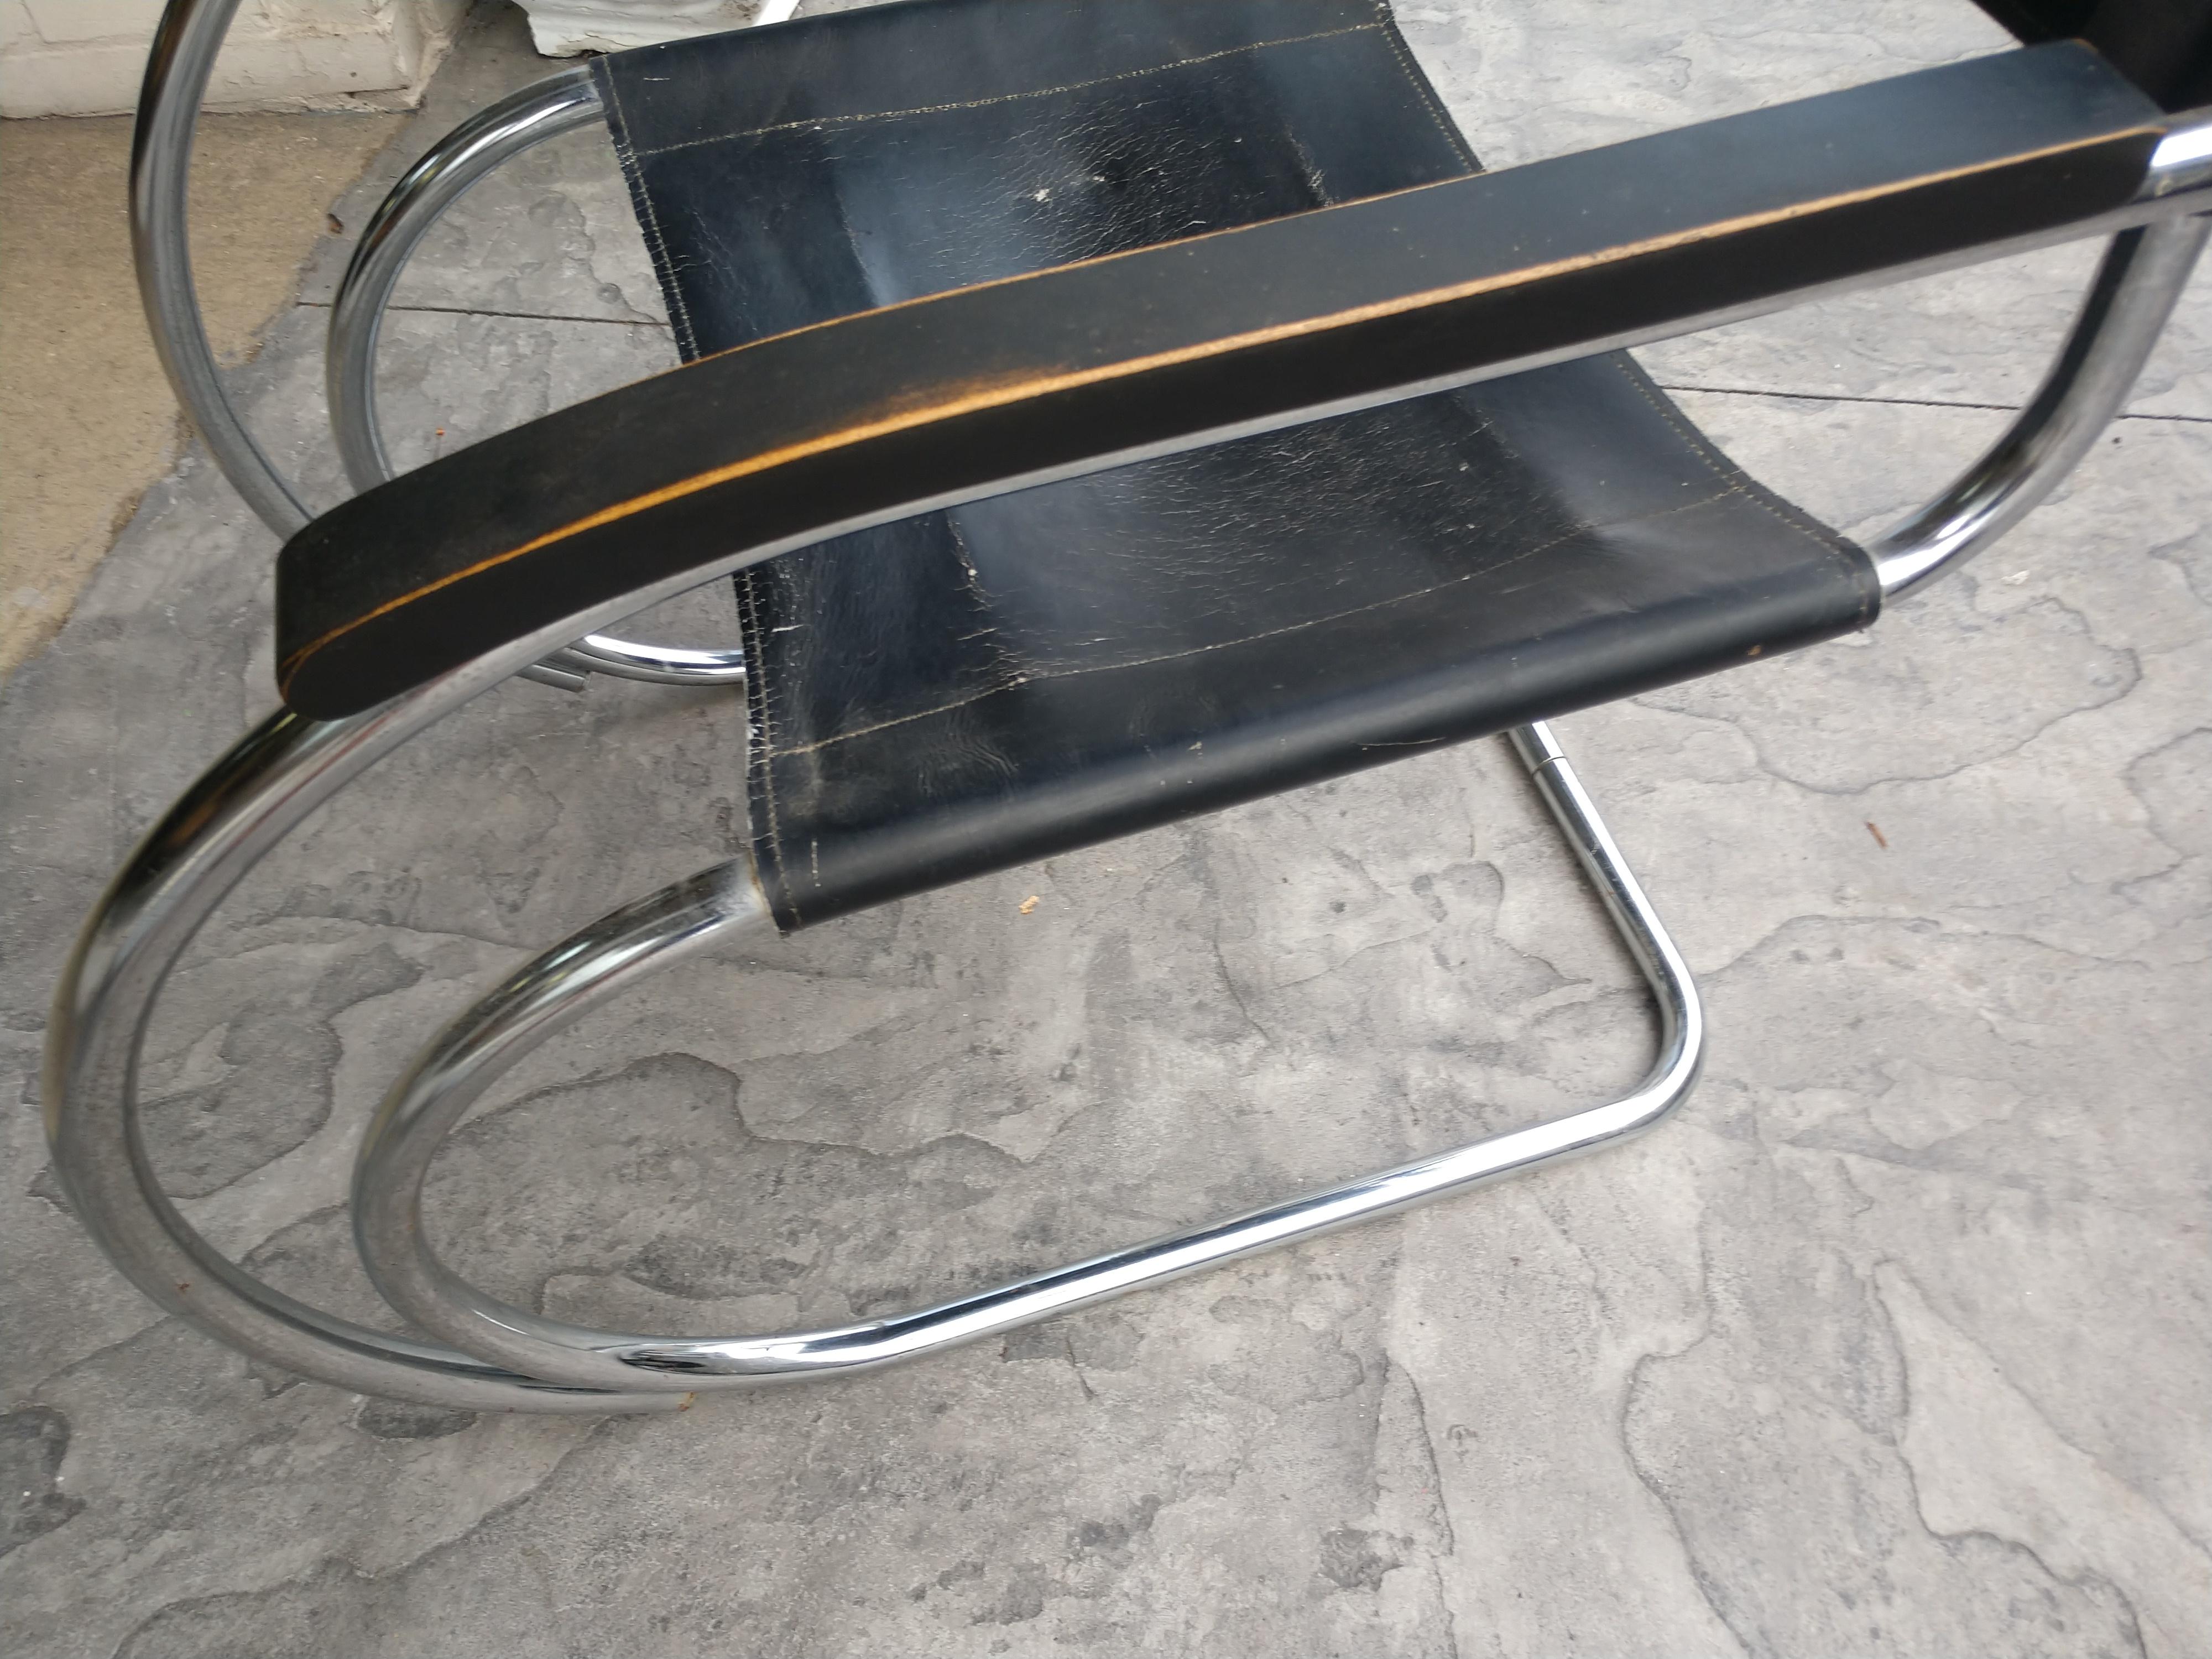 Amazingly timeless chair created in 1926 by Ludwig Mies van der Rohe. Graceful lines in tubular chrome with minimal seat & back but supports so well. This is a 1970s edition of the MR20 possibly by Standing or Knoll. Has wood armrests which are